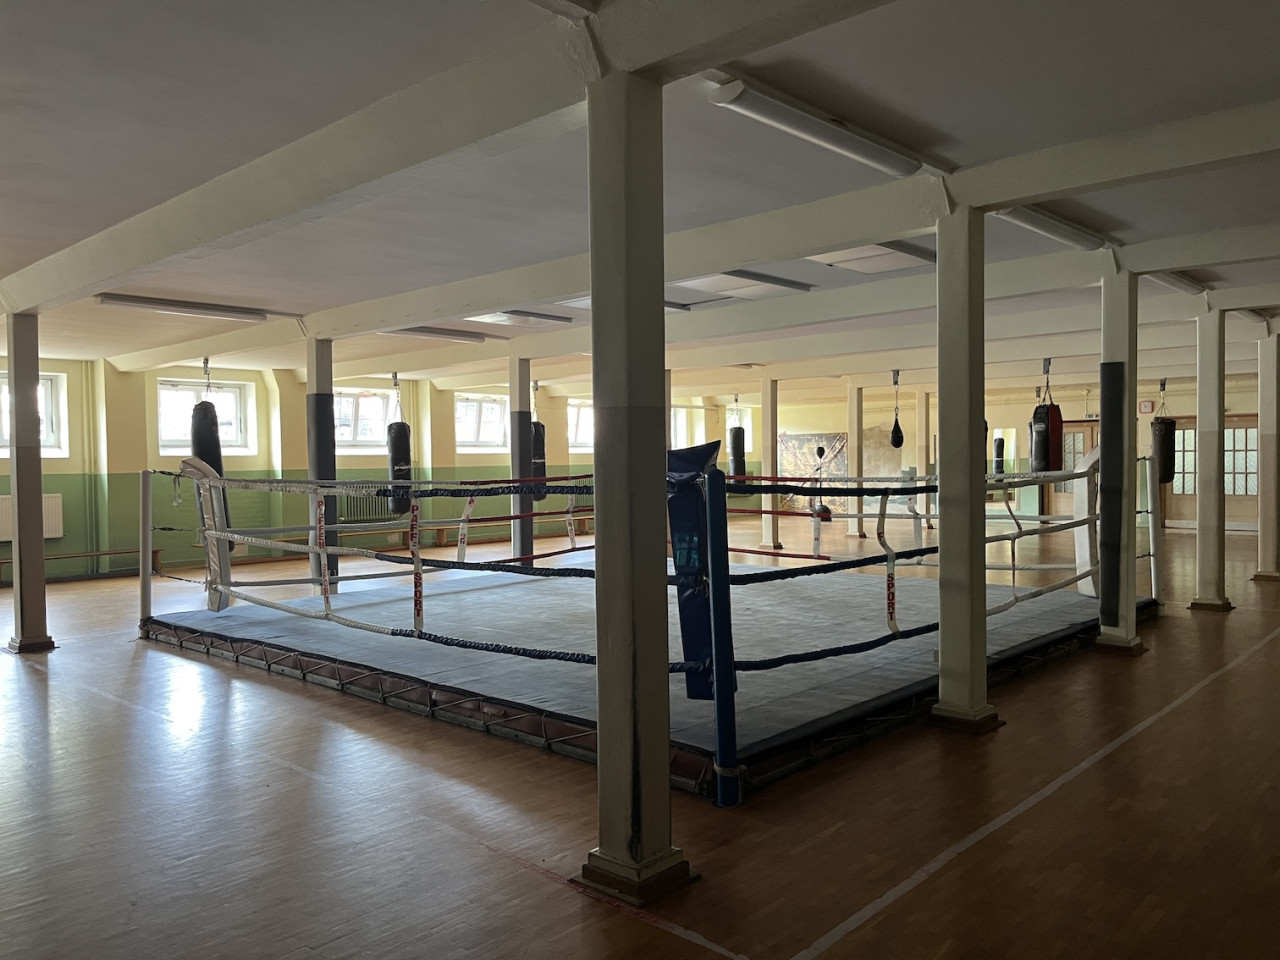 plush74 location film photo event germany berlin vintage gym fitness boxing 172